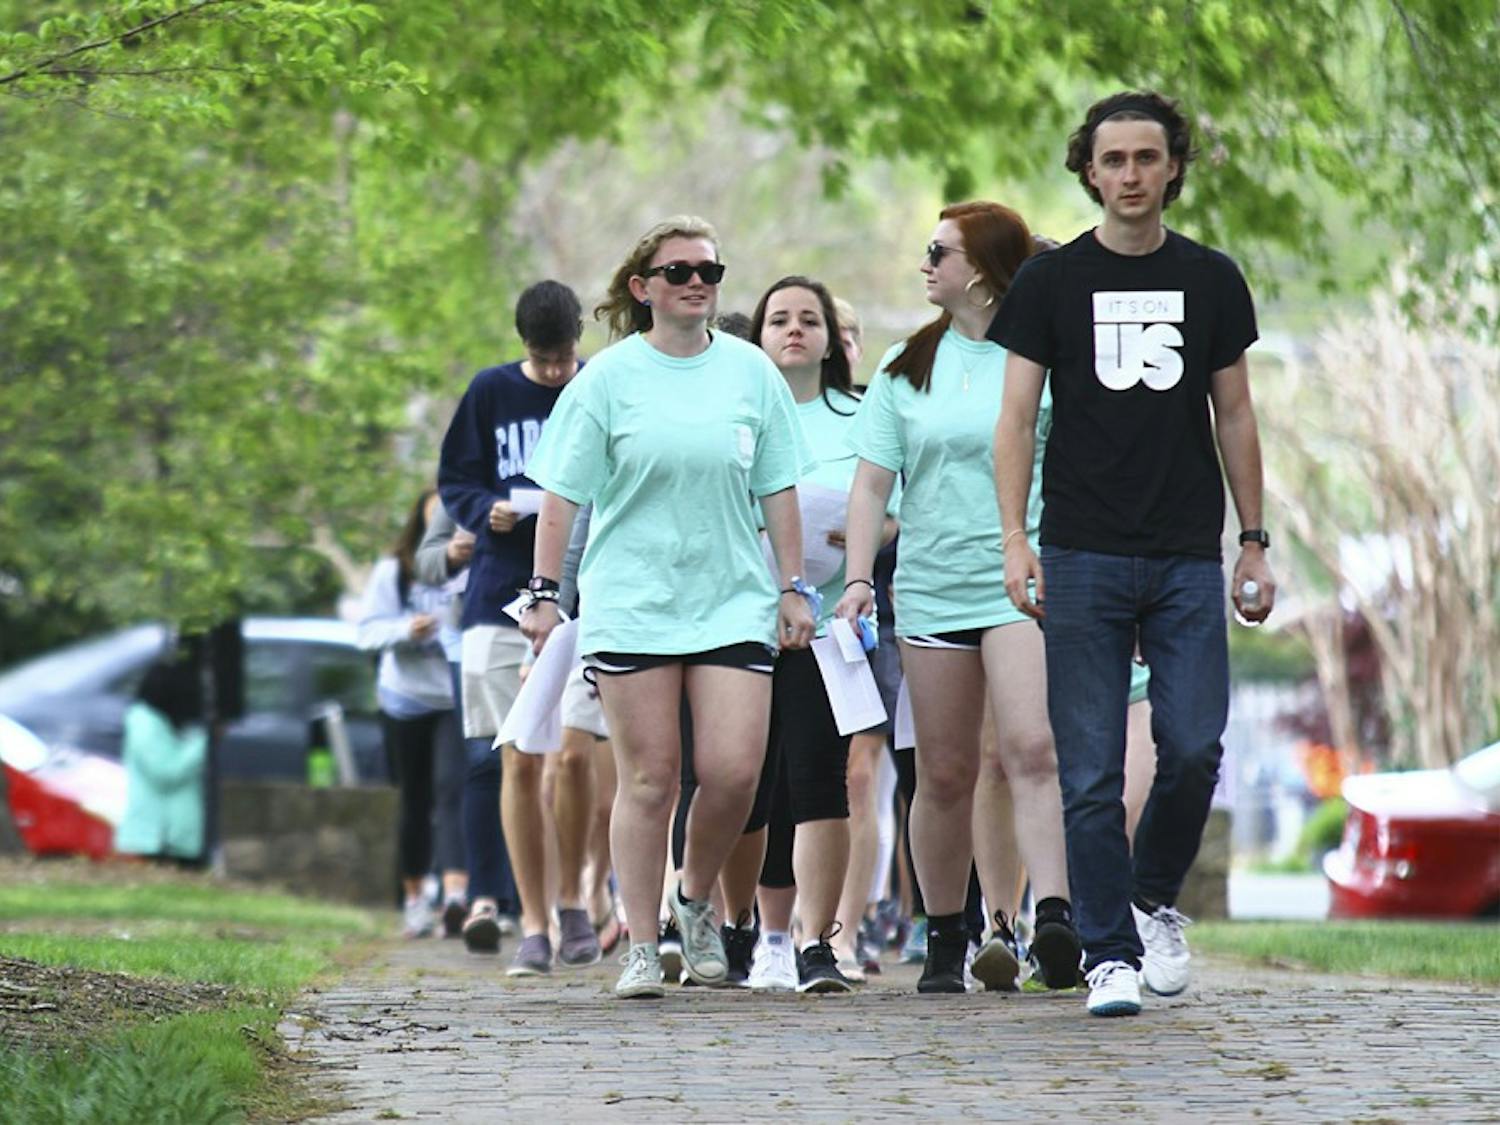 UNC students participate in a walk as a part of the “It’s On Us” even, which sought to raise awareness of and prevent sexual assault.